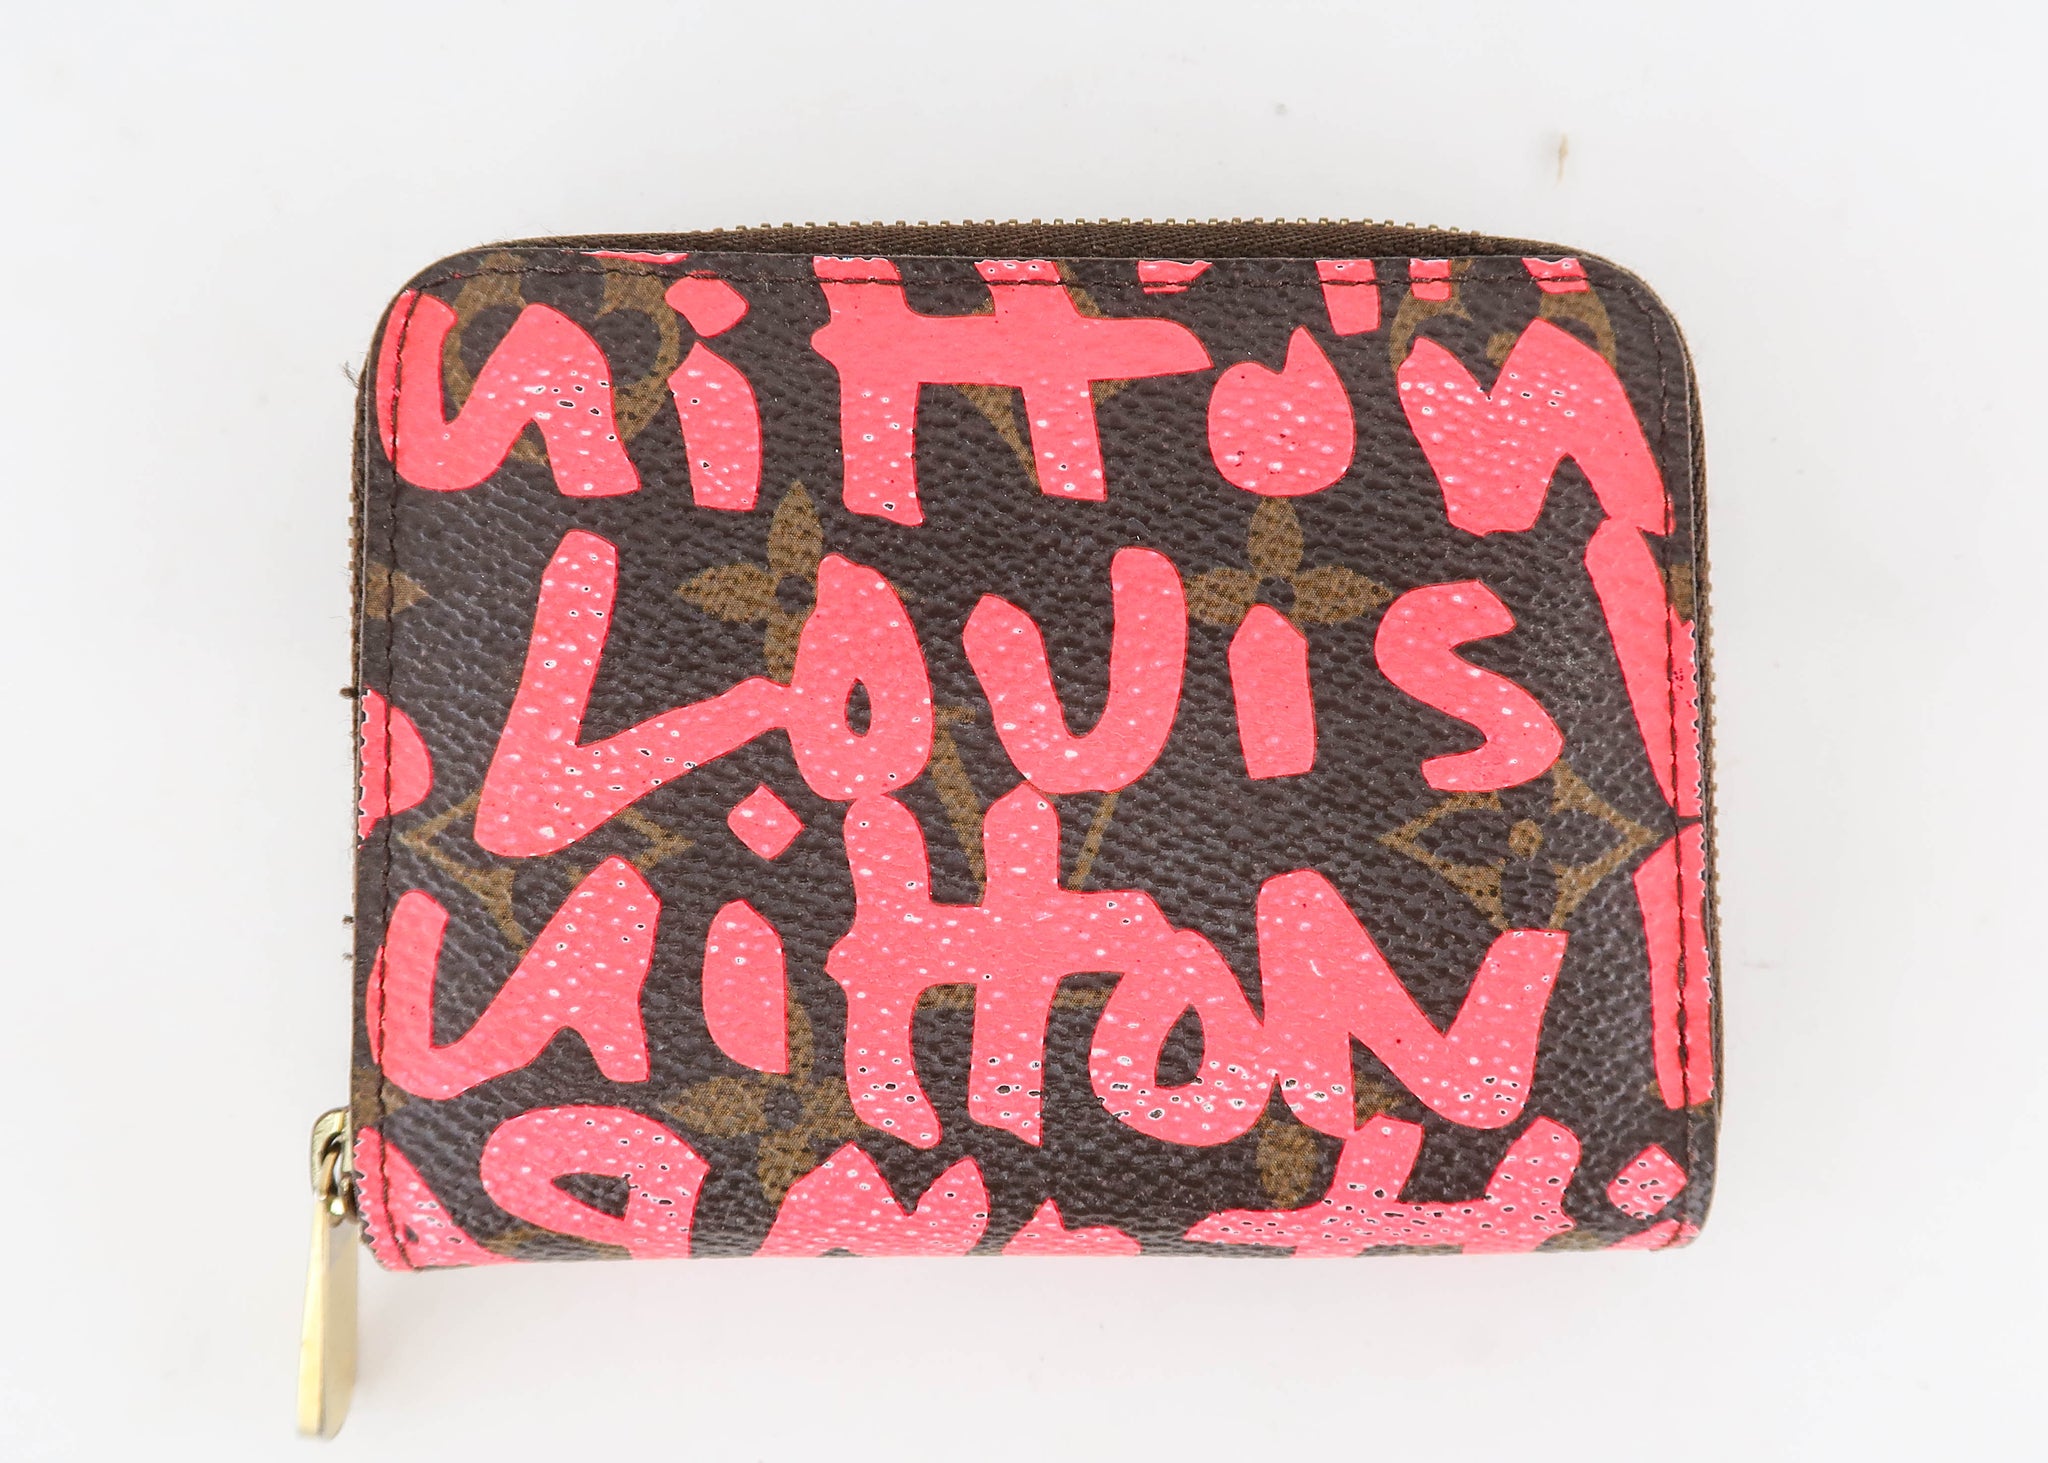 Does anyone know the Louis Vuitton Stephen Sprouse font or